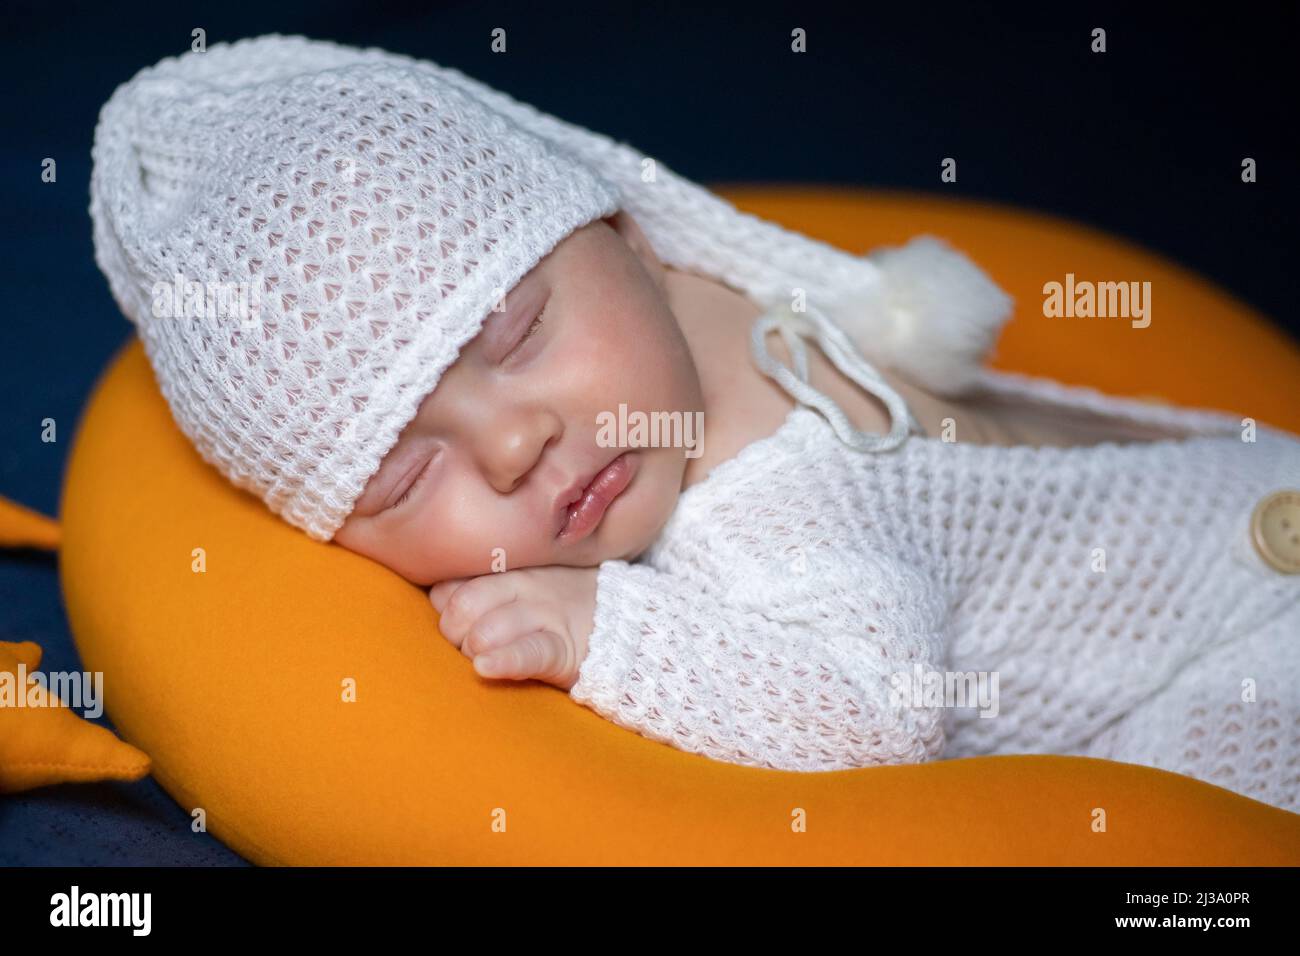 Baby Newborn Sleeping In Woolen Hat On White Wooden Background, Warm Winter Country  Style Stock Photo, Picture and Royalty Free Image. Image 27462458.